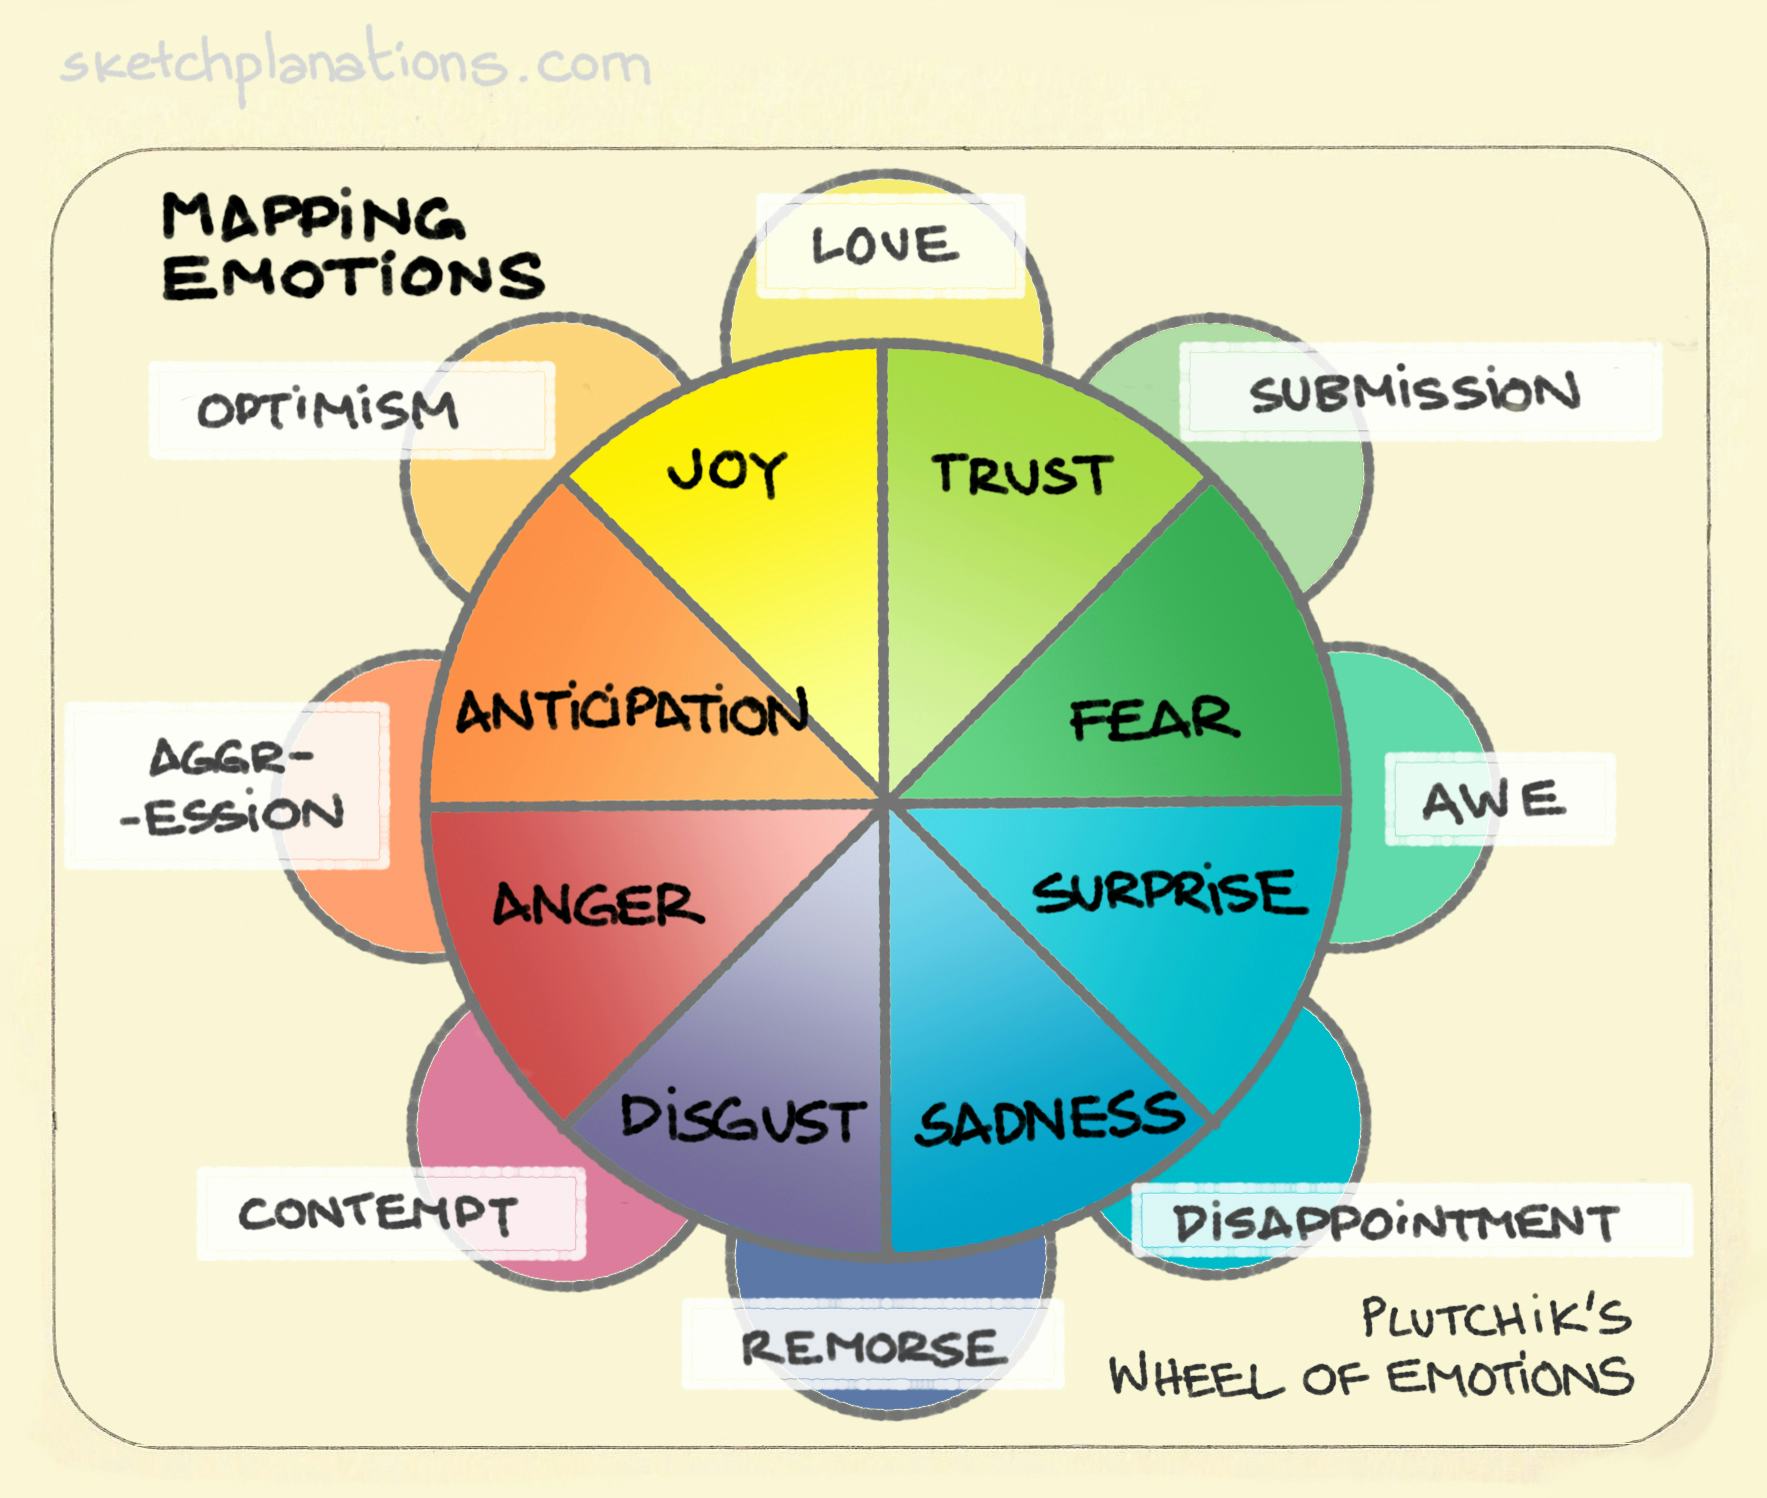 Plutchik's Wheel of Emotions: a colourful wheel showing how emotions mix